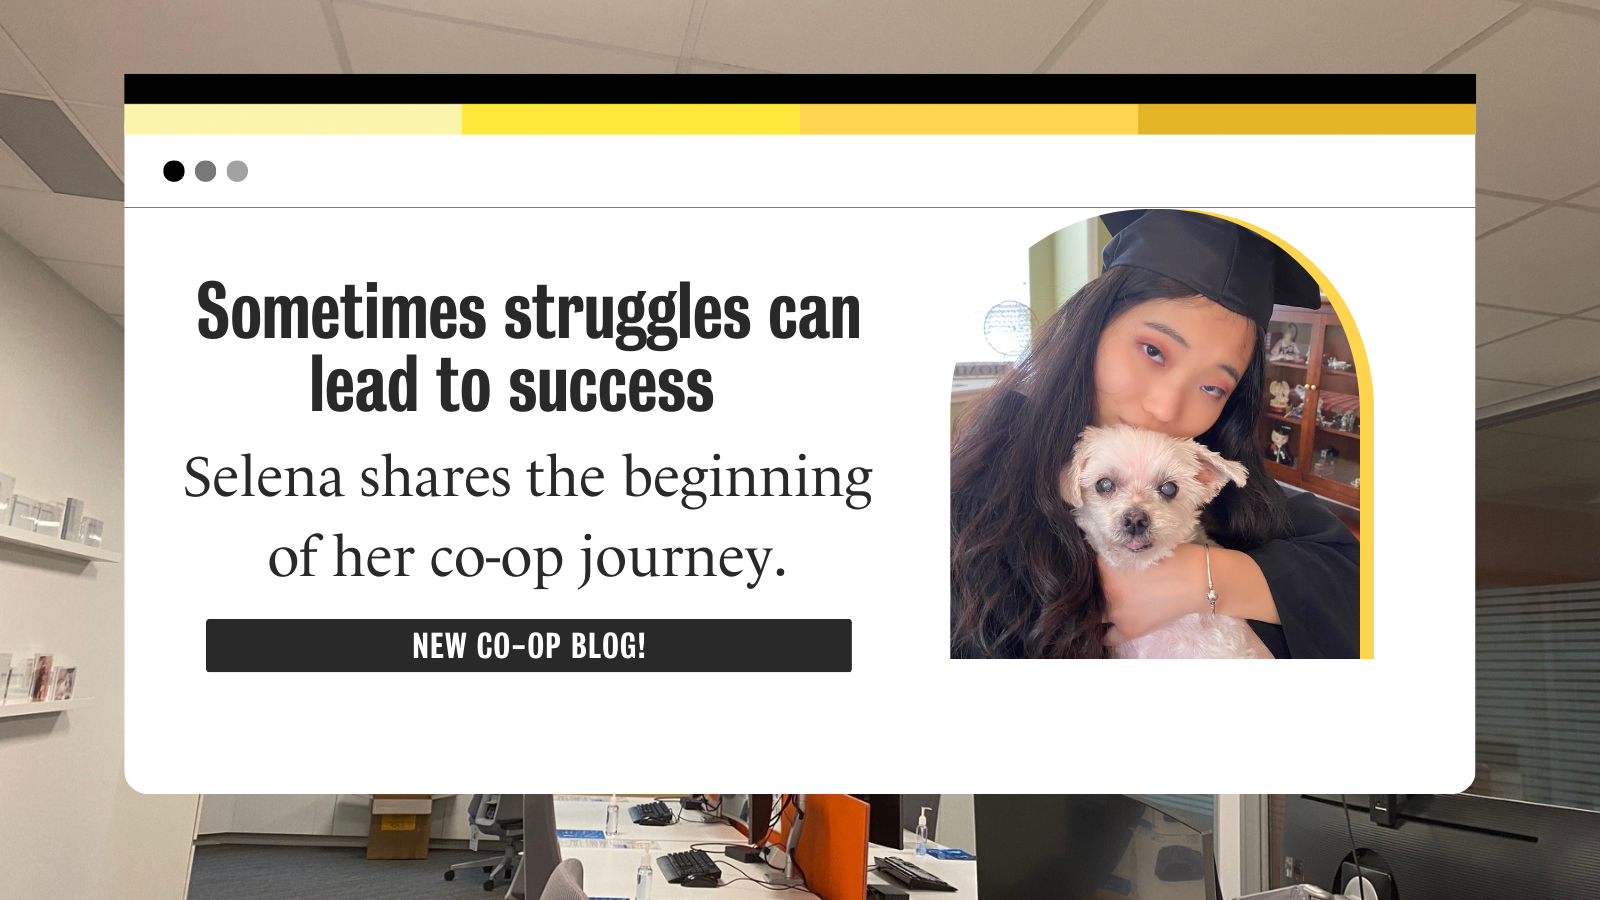 image of Selena stating " Sometimes struggles can lead to success " and Selena shares the begining of her co-op journey"